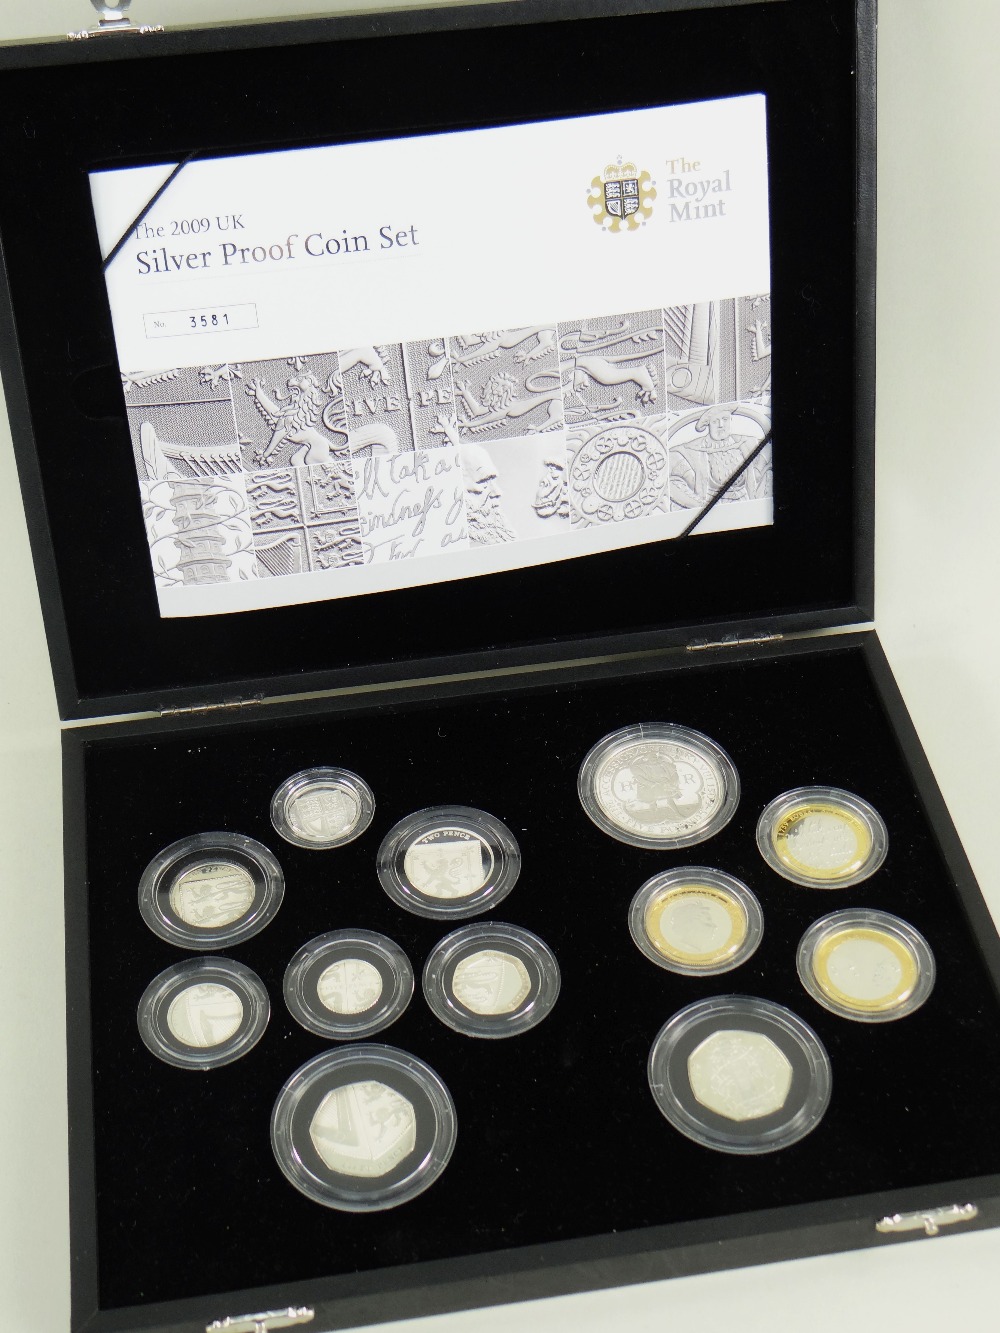 ROYAL MINT 2009 UK SILVER PROOF COIN SET, cased with Certificate of Authenticity, No. 3581,